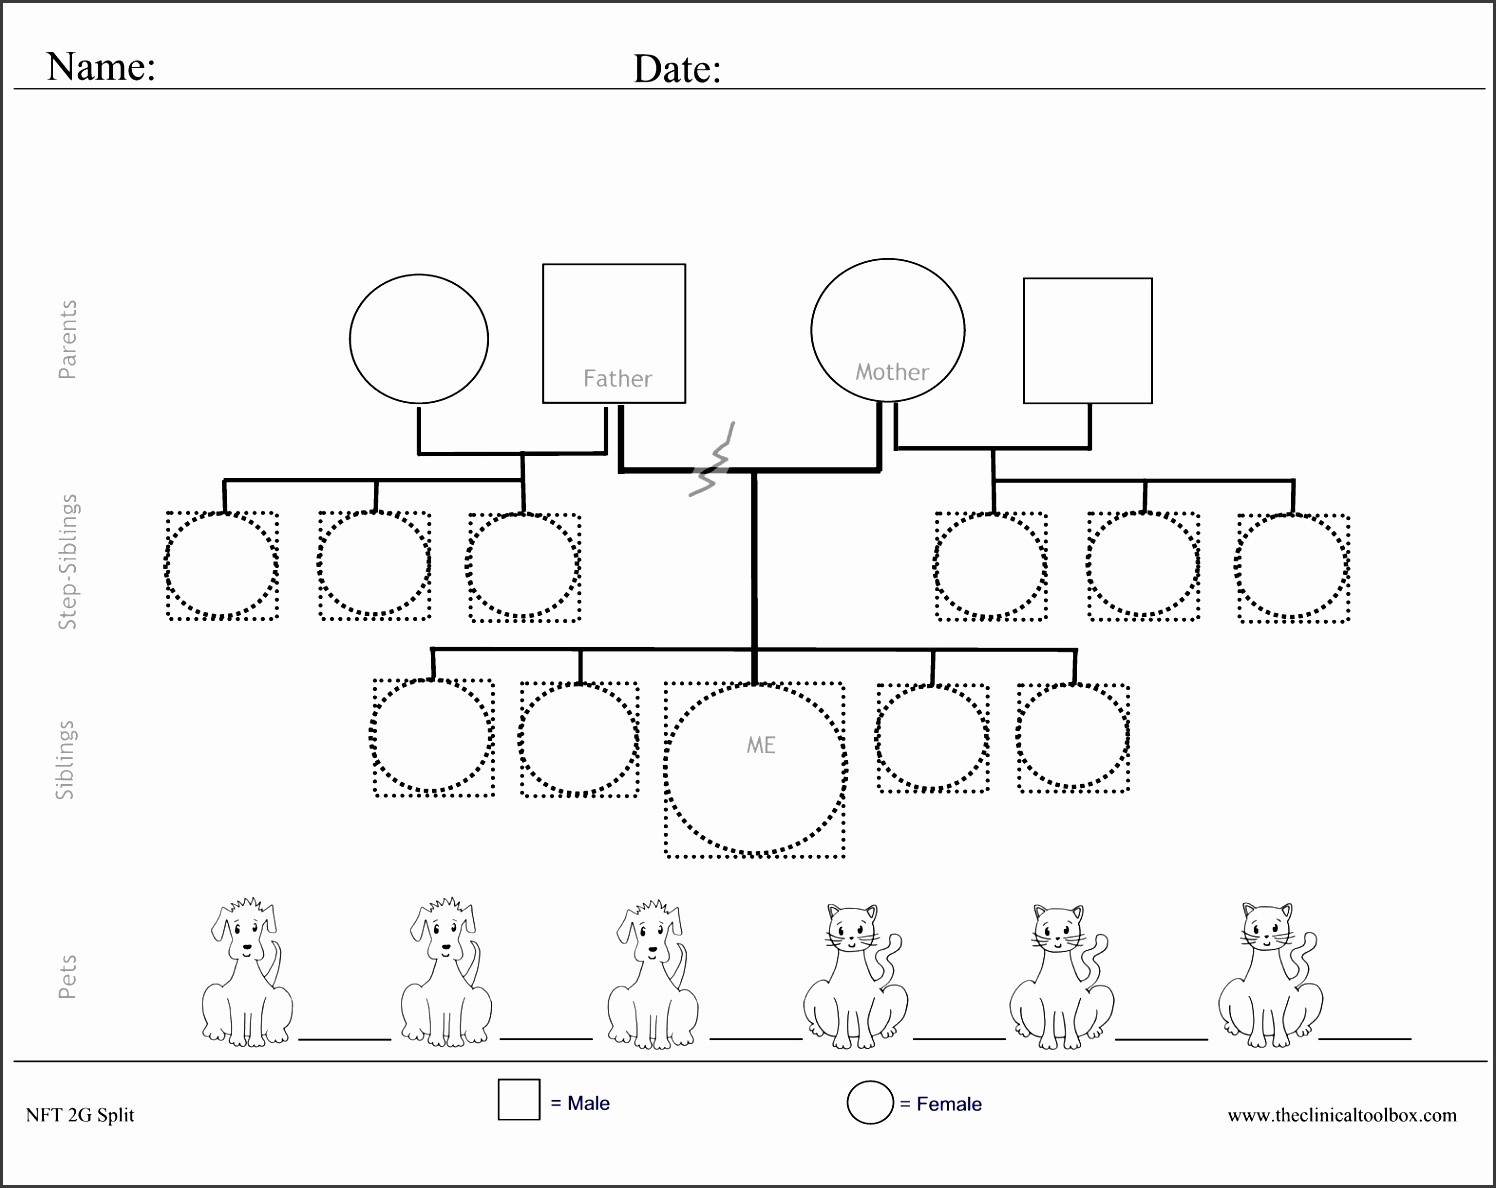 genogram template microsoft word free 30 free genogram templates symbols genograms are mostly made use to these questions should help you to